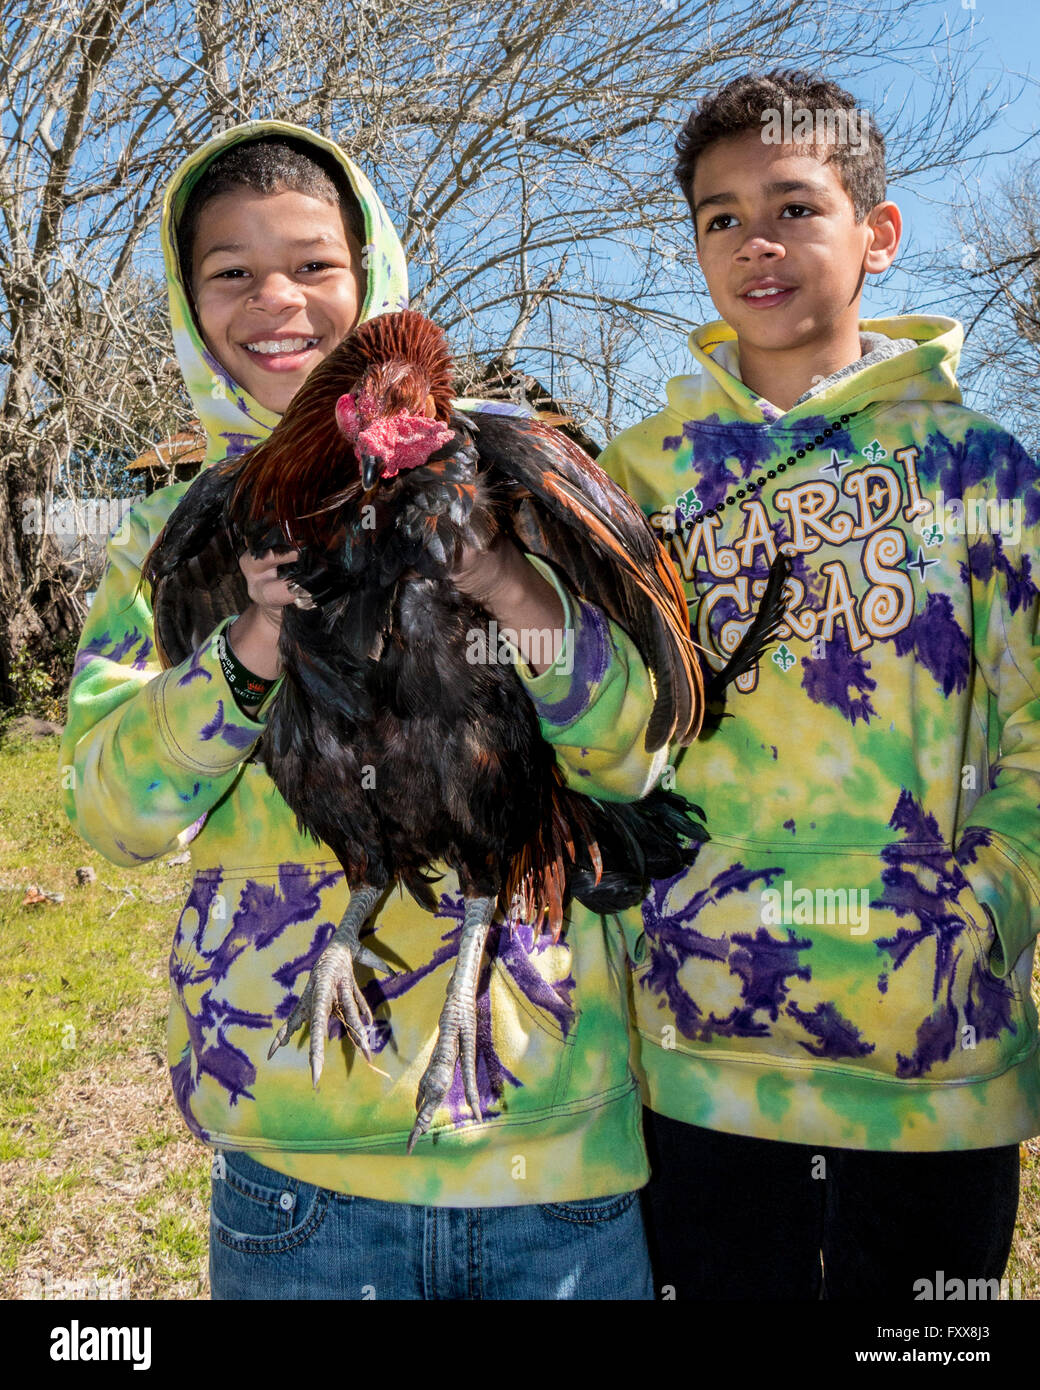 https://c8.alamy.com/comp/FXX8J3/victorious-young-boy-chicken-catcher-during-the-traditional-chicken-FXX8J3.jpg